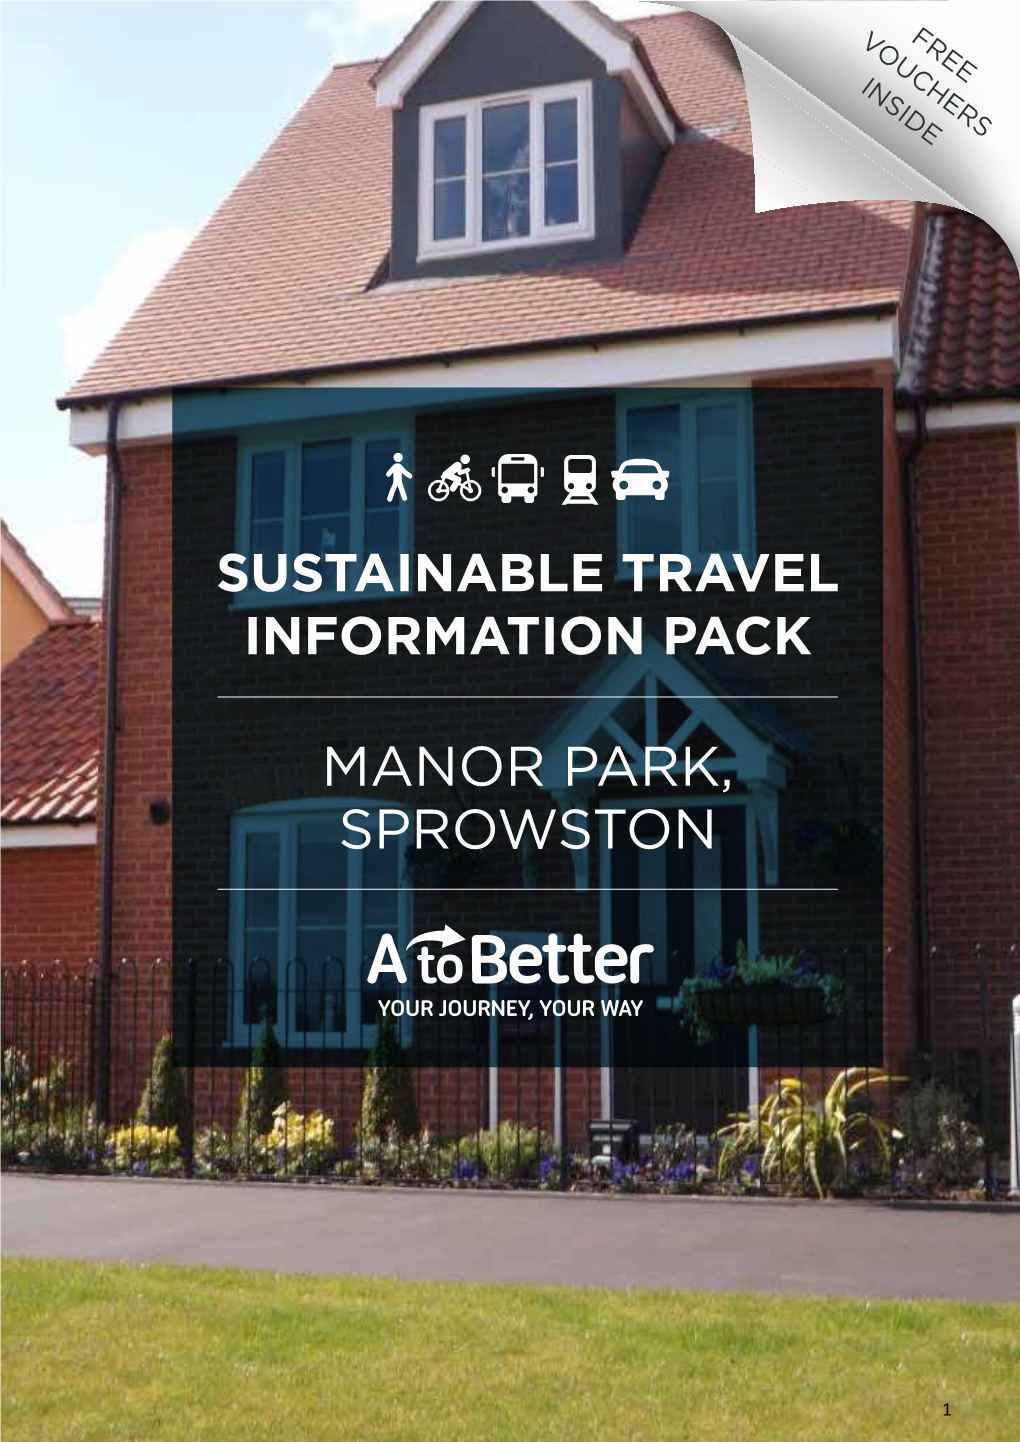 Manor Park, Sprowston